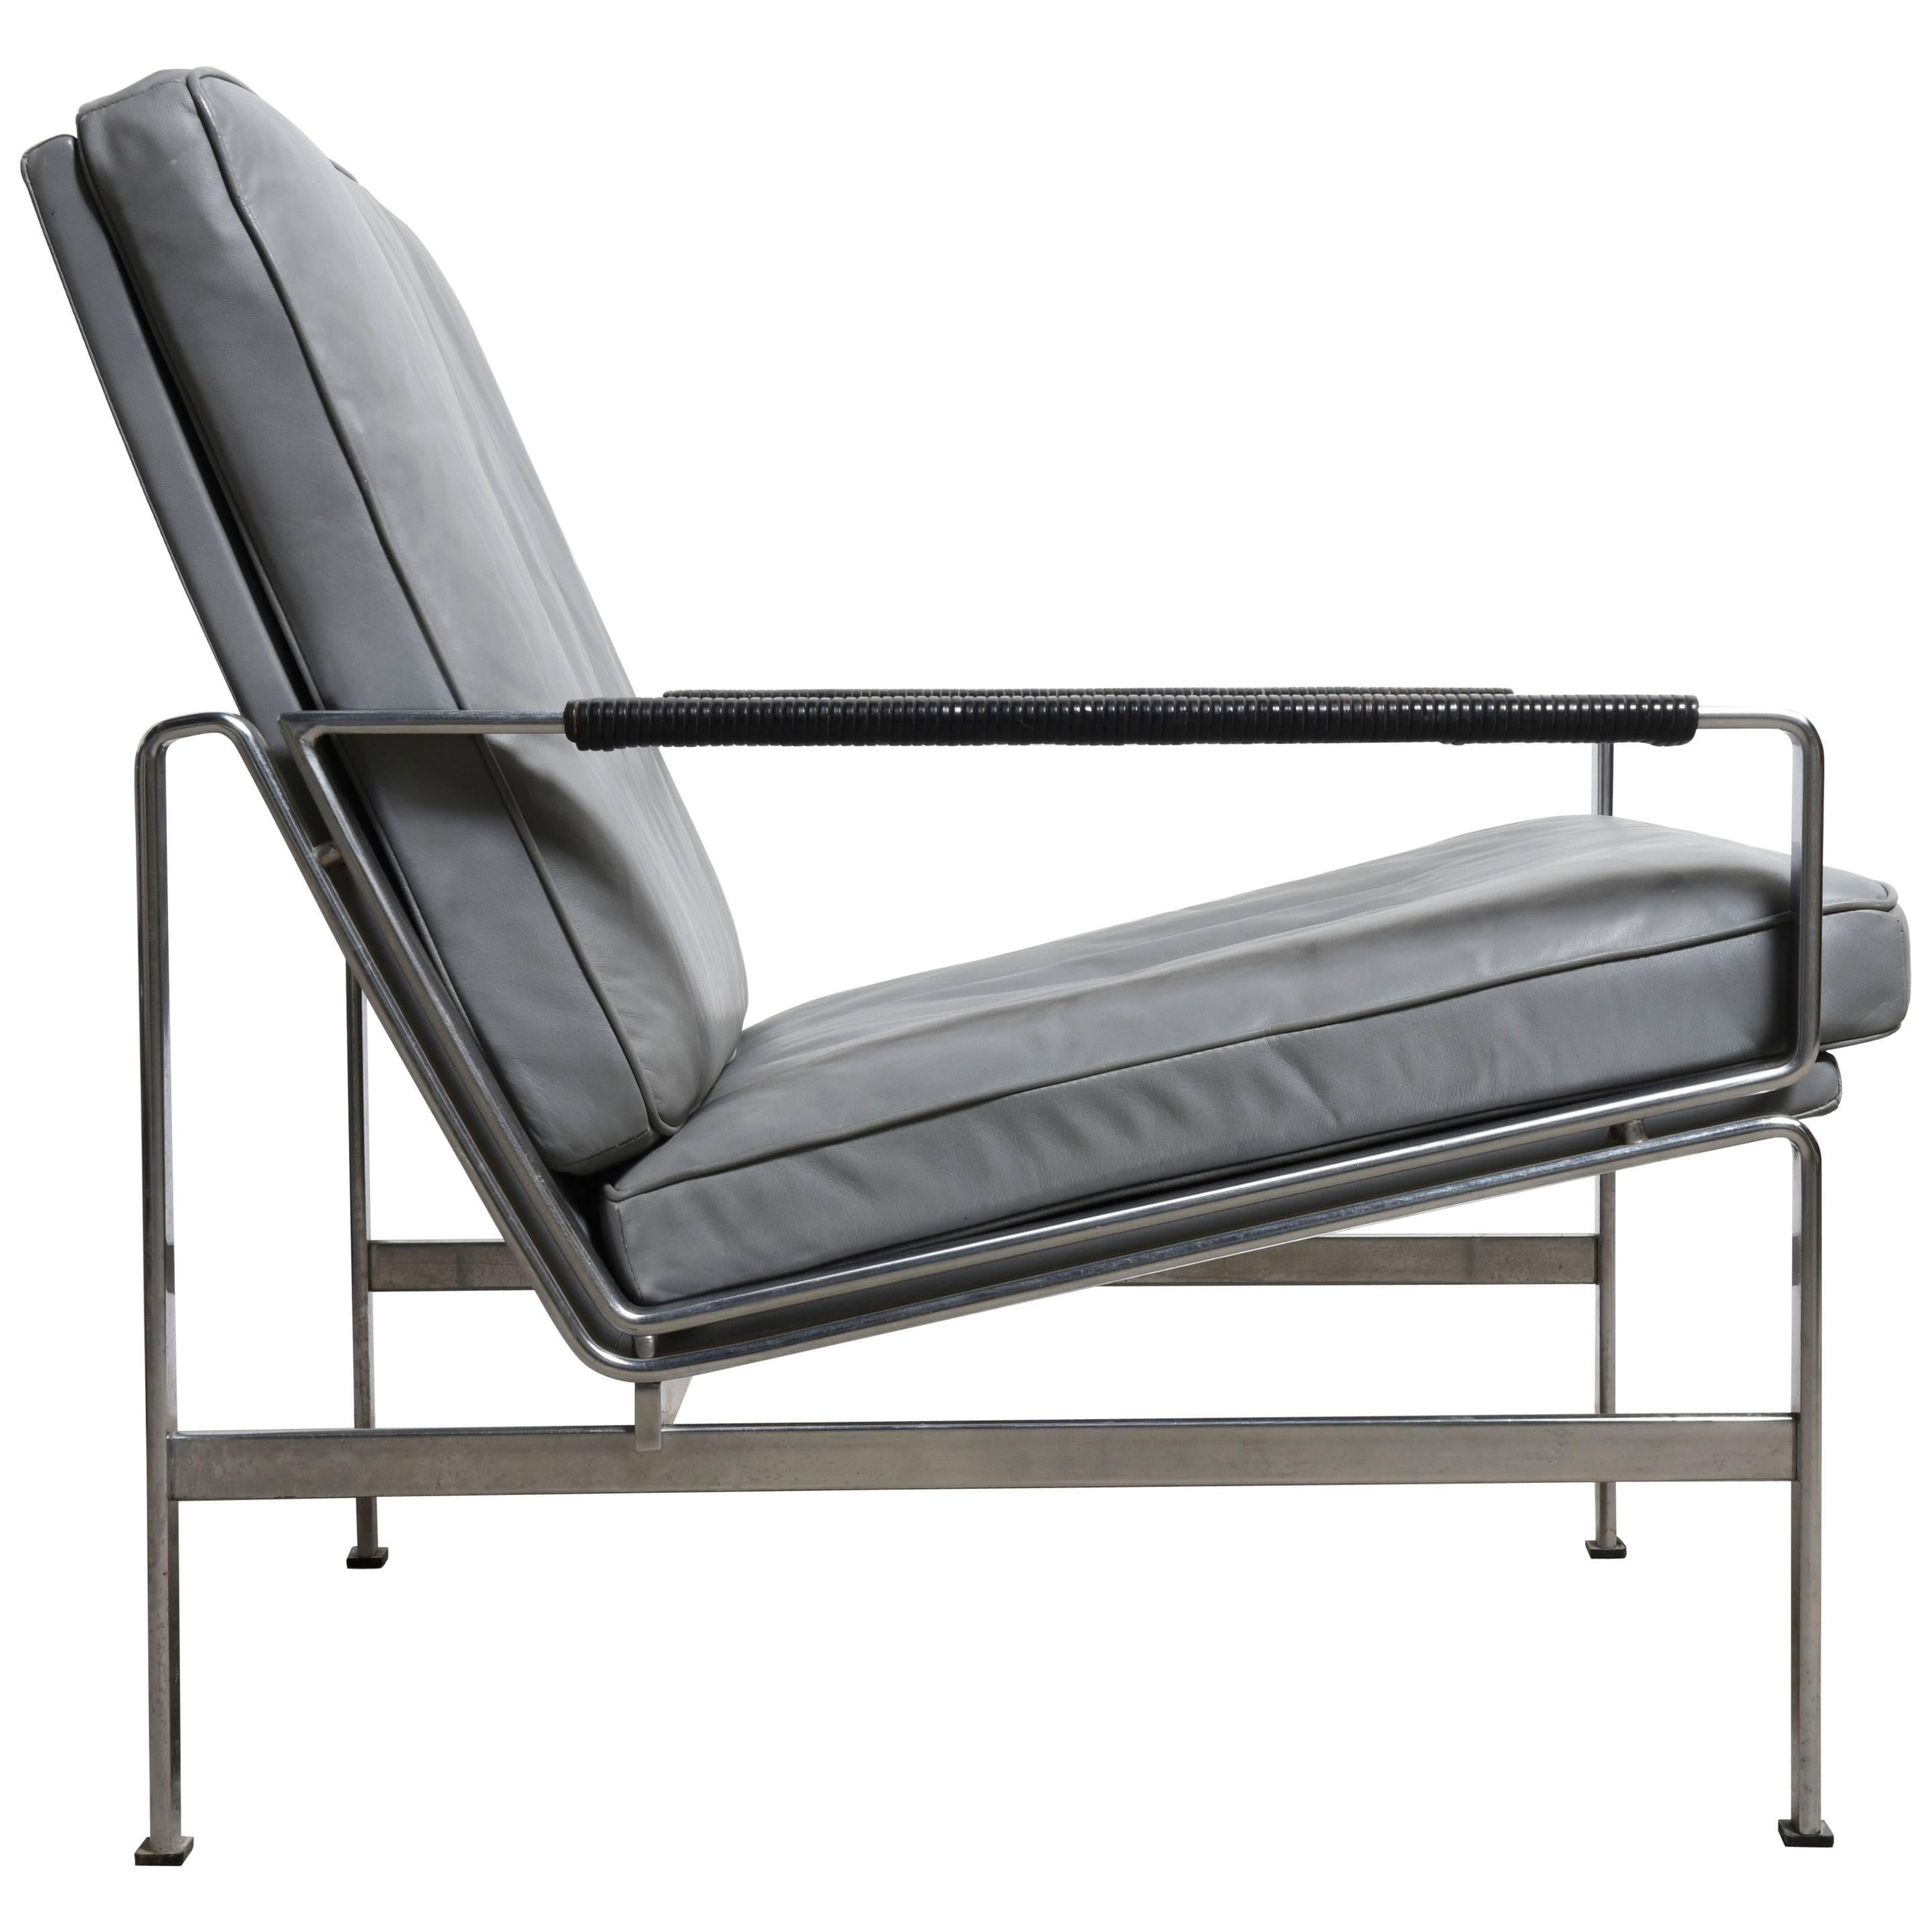 FK 6720 Classics of Midcentury Modernism Lounge Chair by Fabricius and Kastholm